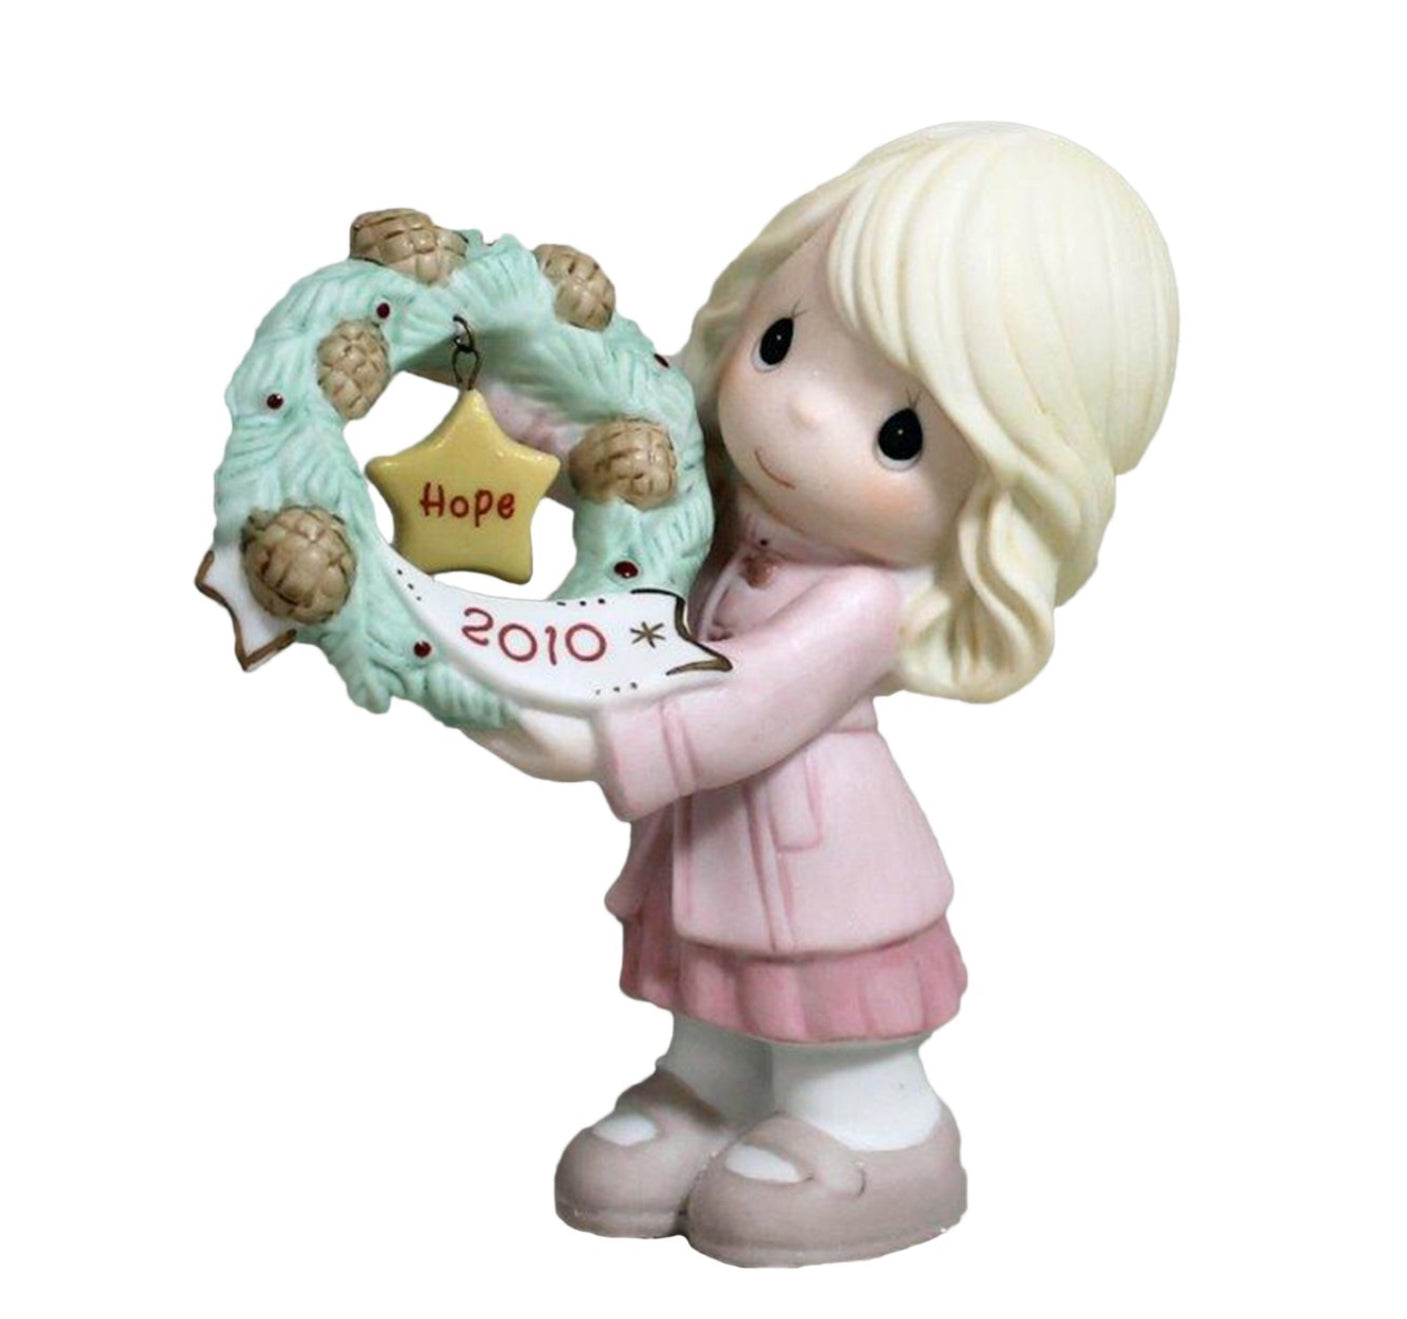 My Hope Is In You - Dated Annual 2010 Precious Moment Figurine